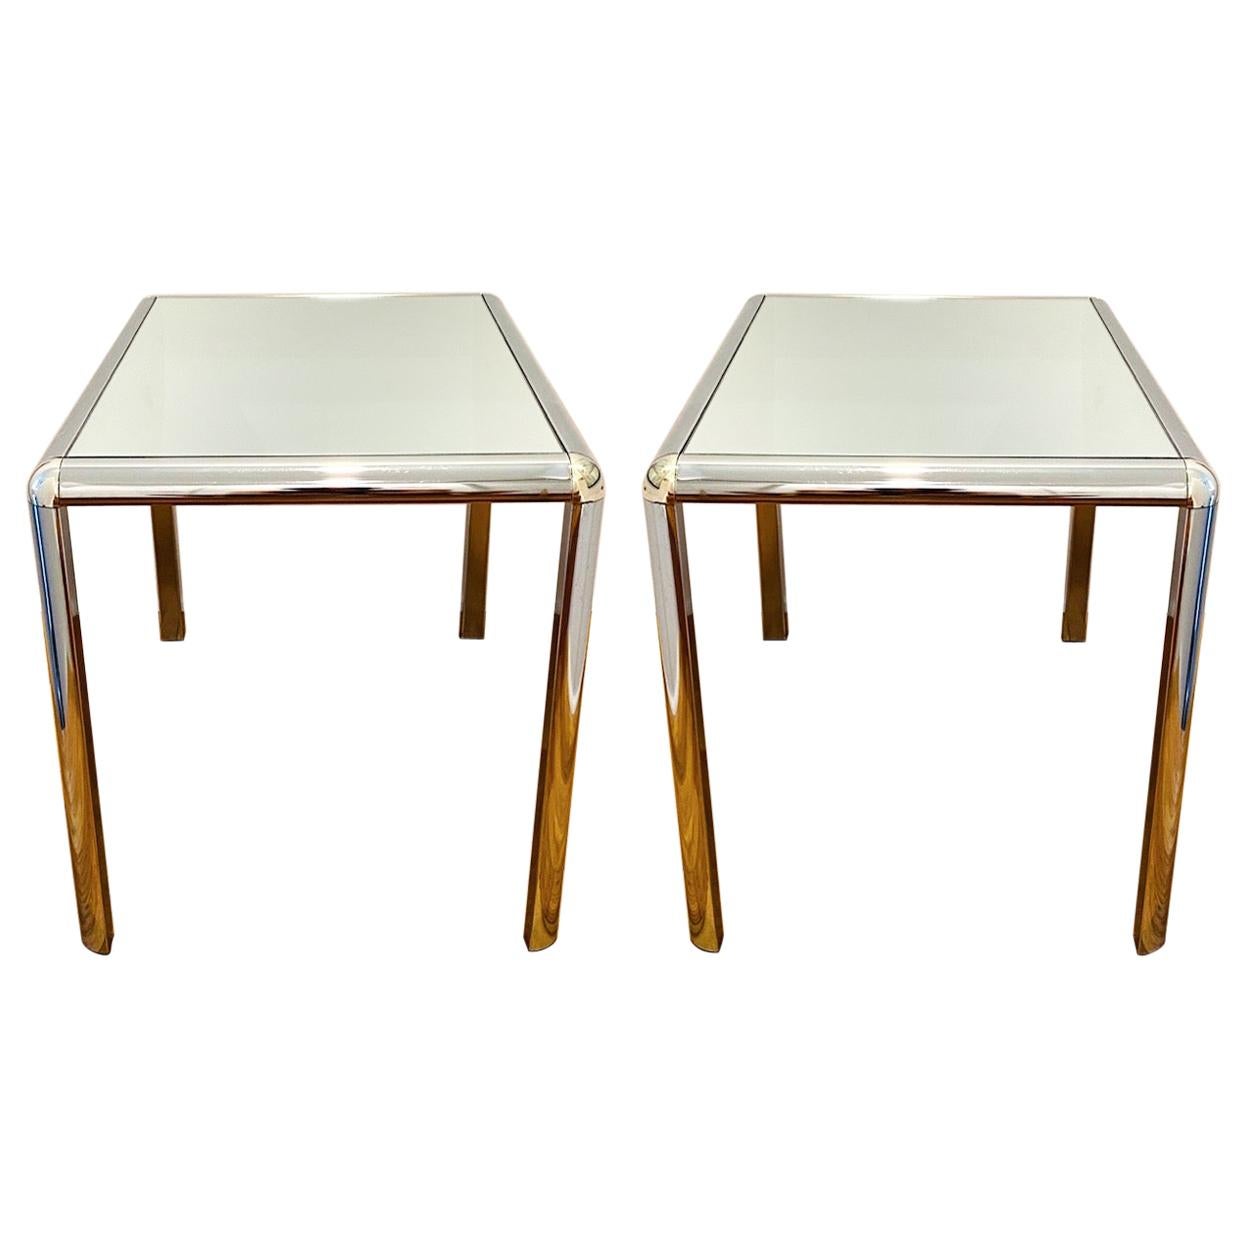 Pair of Hollywood Regency Chrome Side Tables with Mirrored Tops, c. 1970's